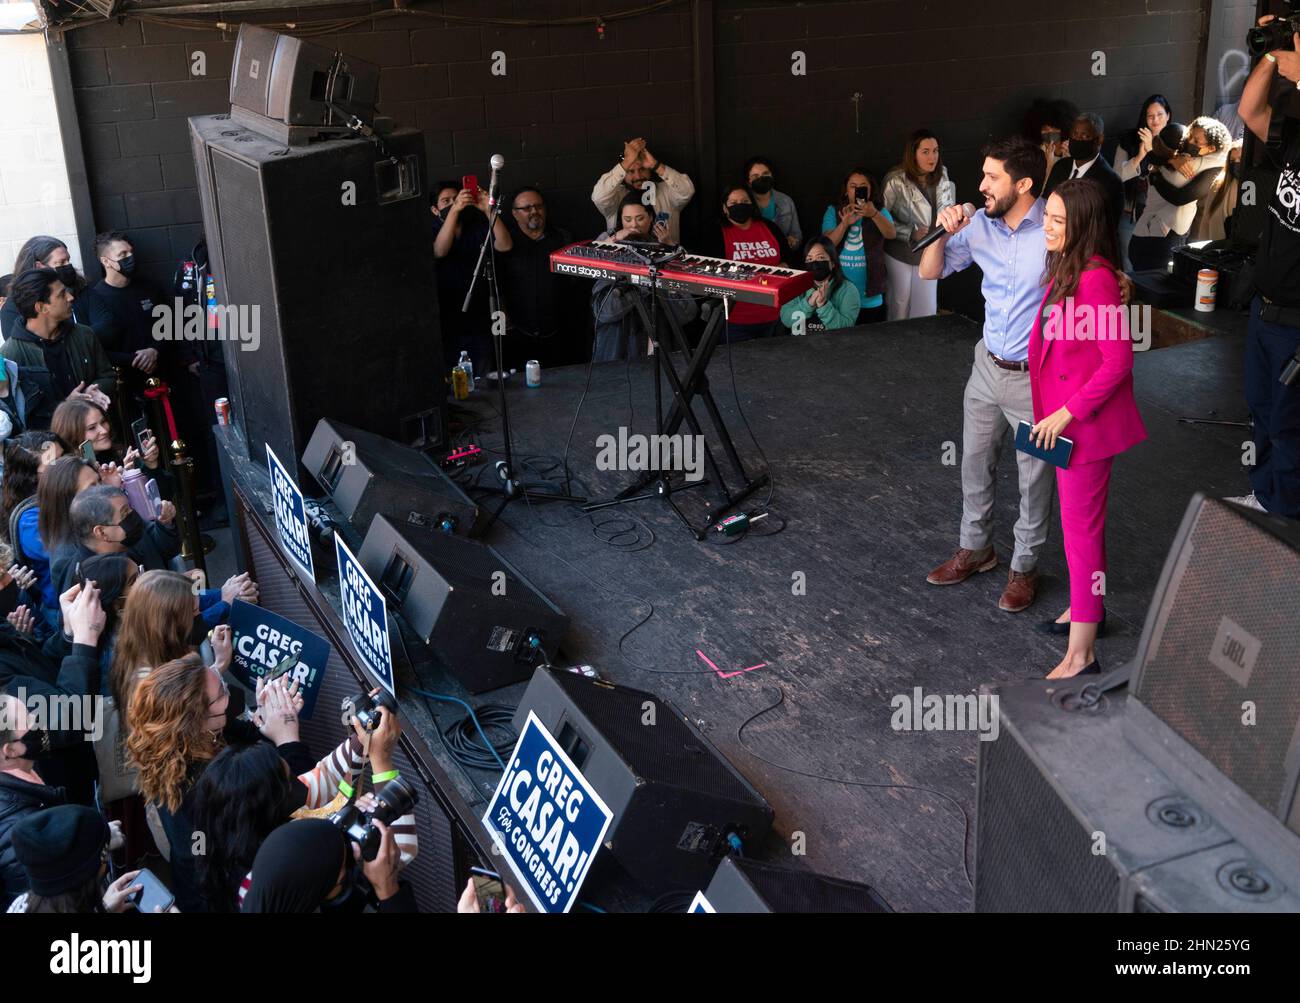 Austin, Texas USA, 13th Feb, 2022. U.S. Representative ALEXANDRIA OCASIO-CORTEZ (AOC), (D-New York) makes appearance at campaign rally for candidate Greg Casar, a progressive running in the Democratic primary for Texas Congressional District 35 in central Texas. Credit: Bob Daemmrich/Alamy Live News Stock Photo